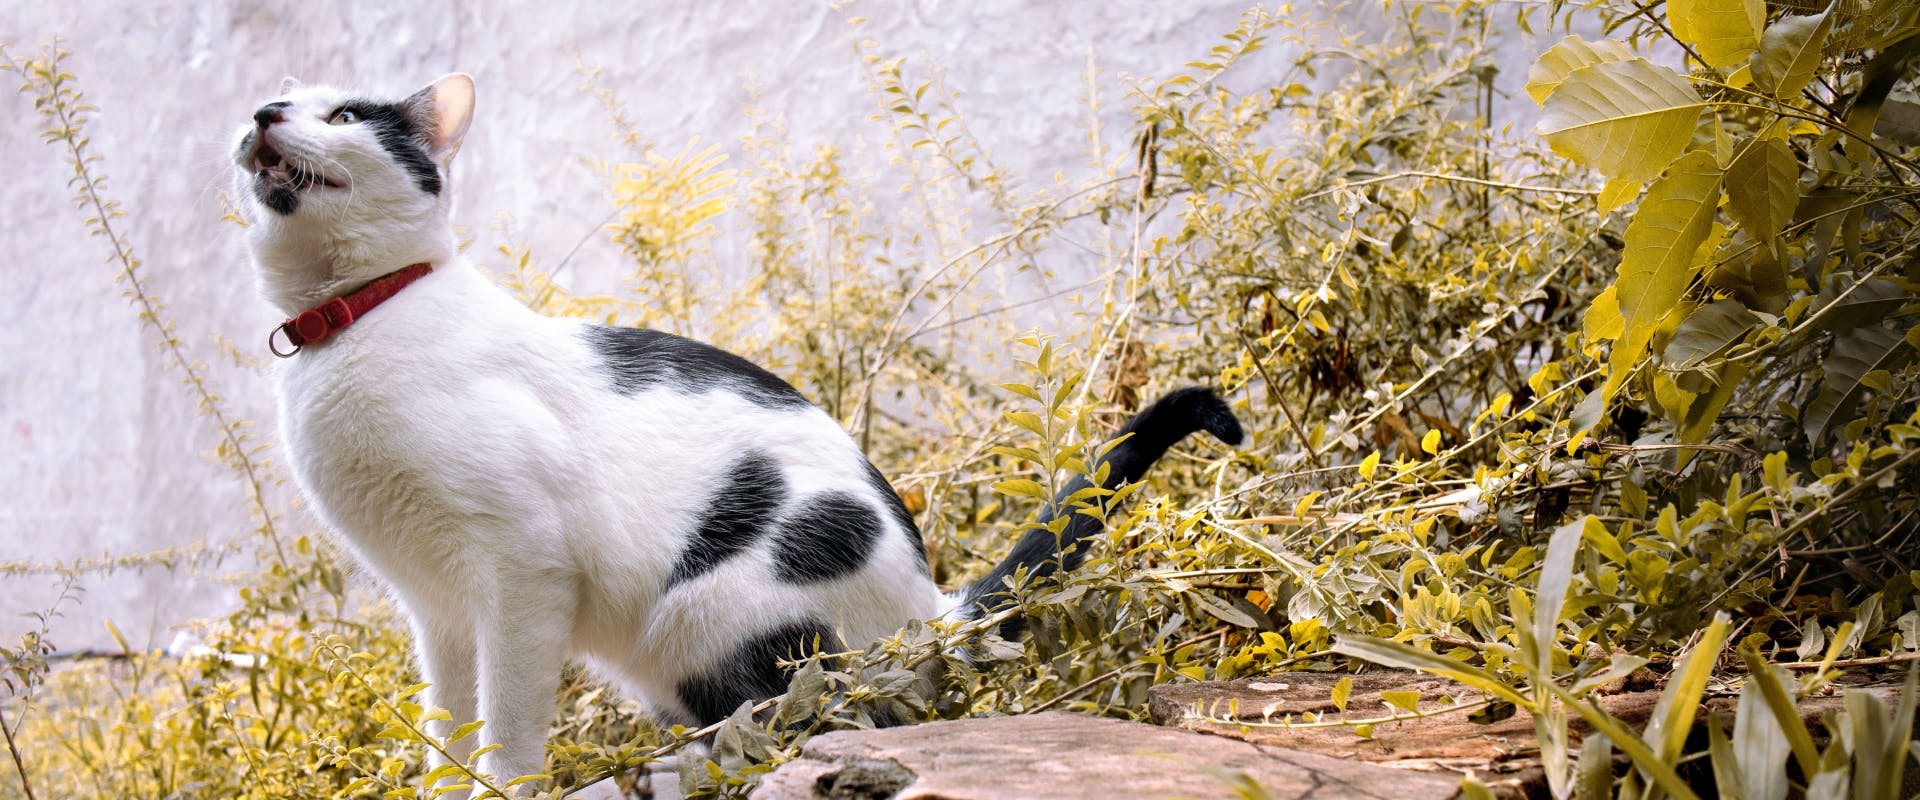 a black and white cat with a red collar looking up while sat in a wild garden